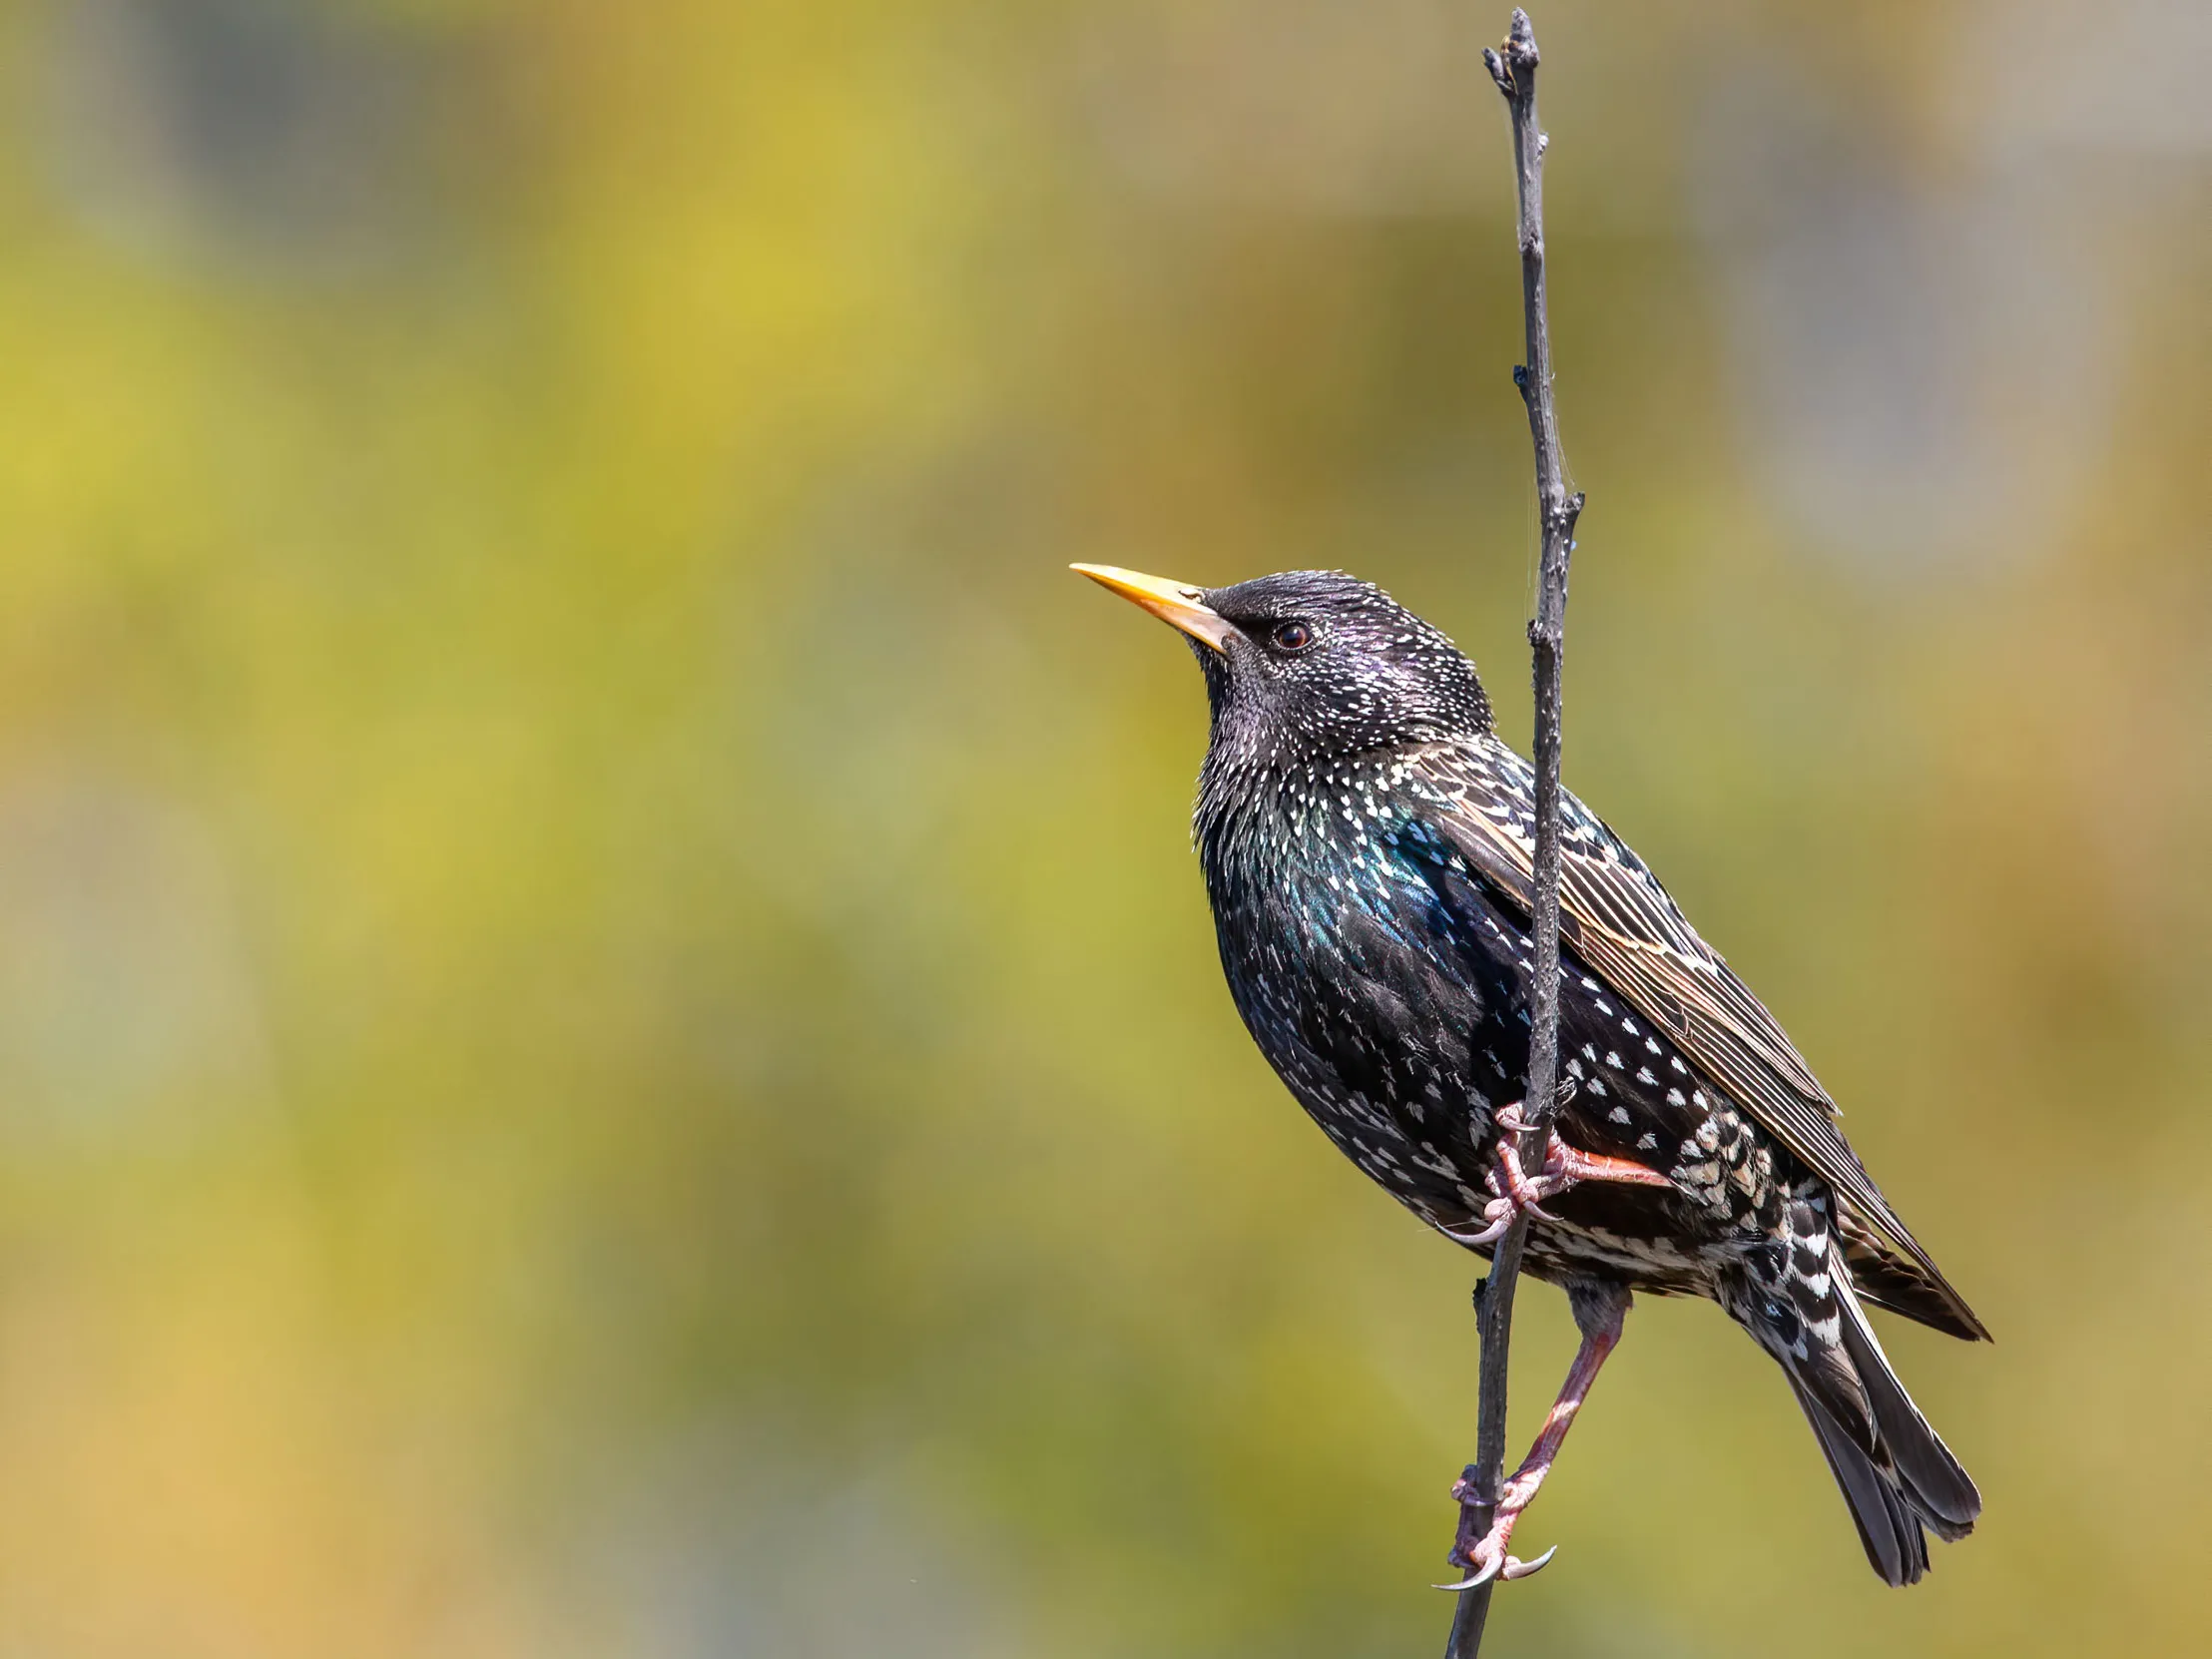 A lone Starling perched on a branch.